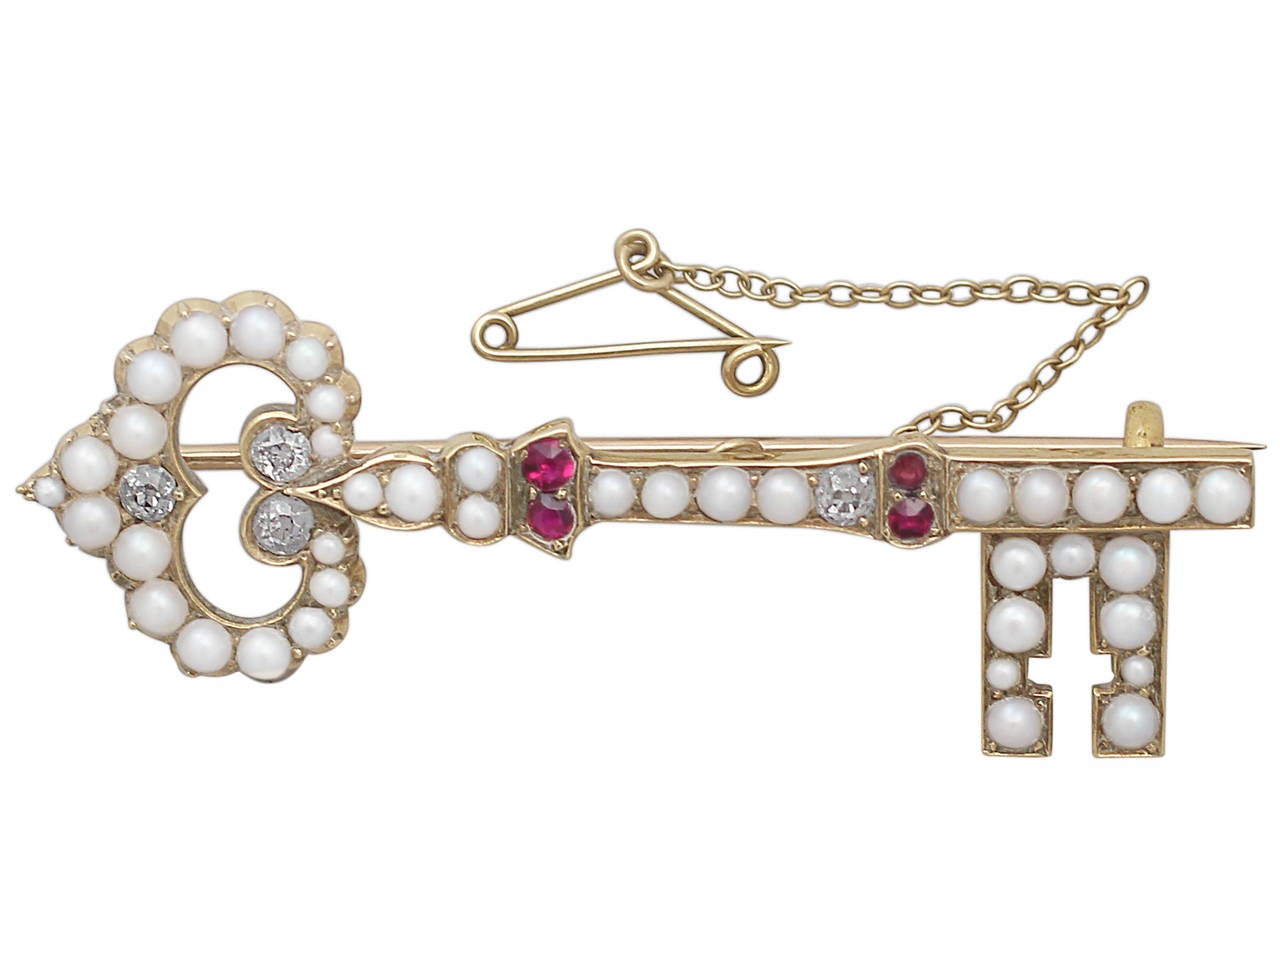 A fine antique Victorian 0.32 ct diamond, seed pearl and ruby, 18 karat yellow gold key brooch; part of our diverse antique jewelry and estate jewelry collections

This fine antique Victorian brooch has been crafted in 18k yellow gold, in the form